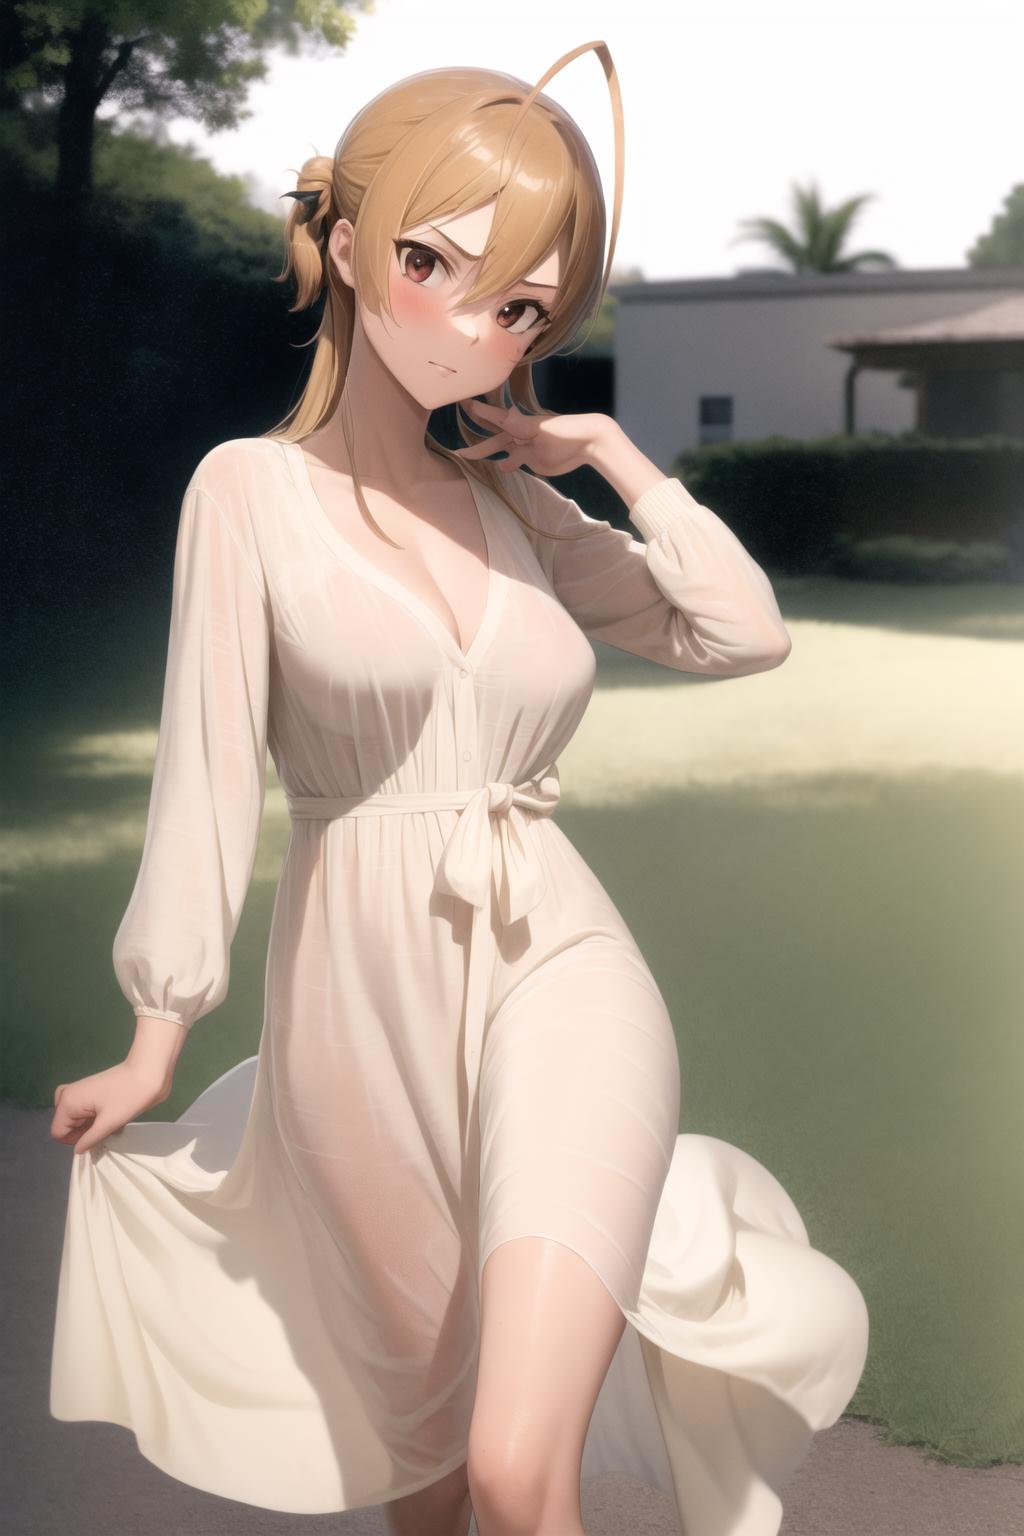 Linen dress - clothing image by psoft